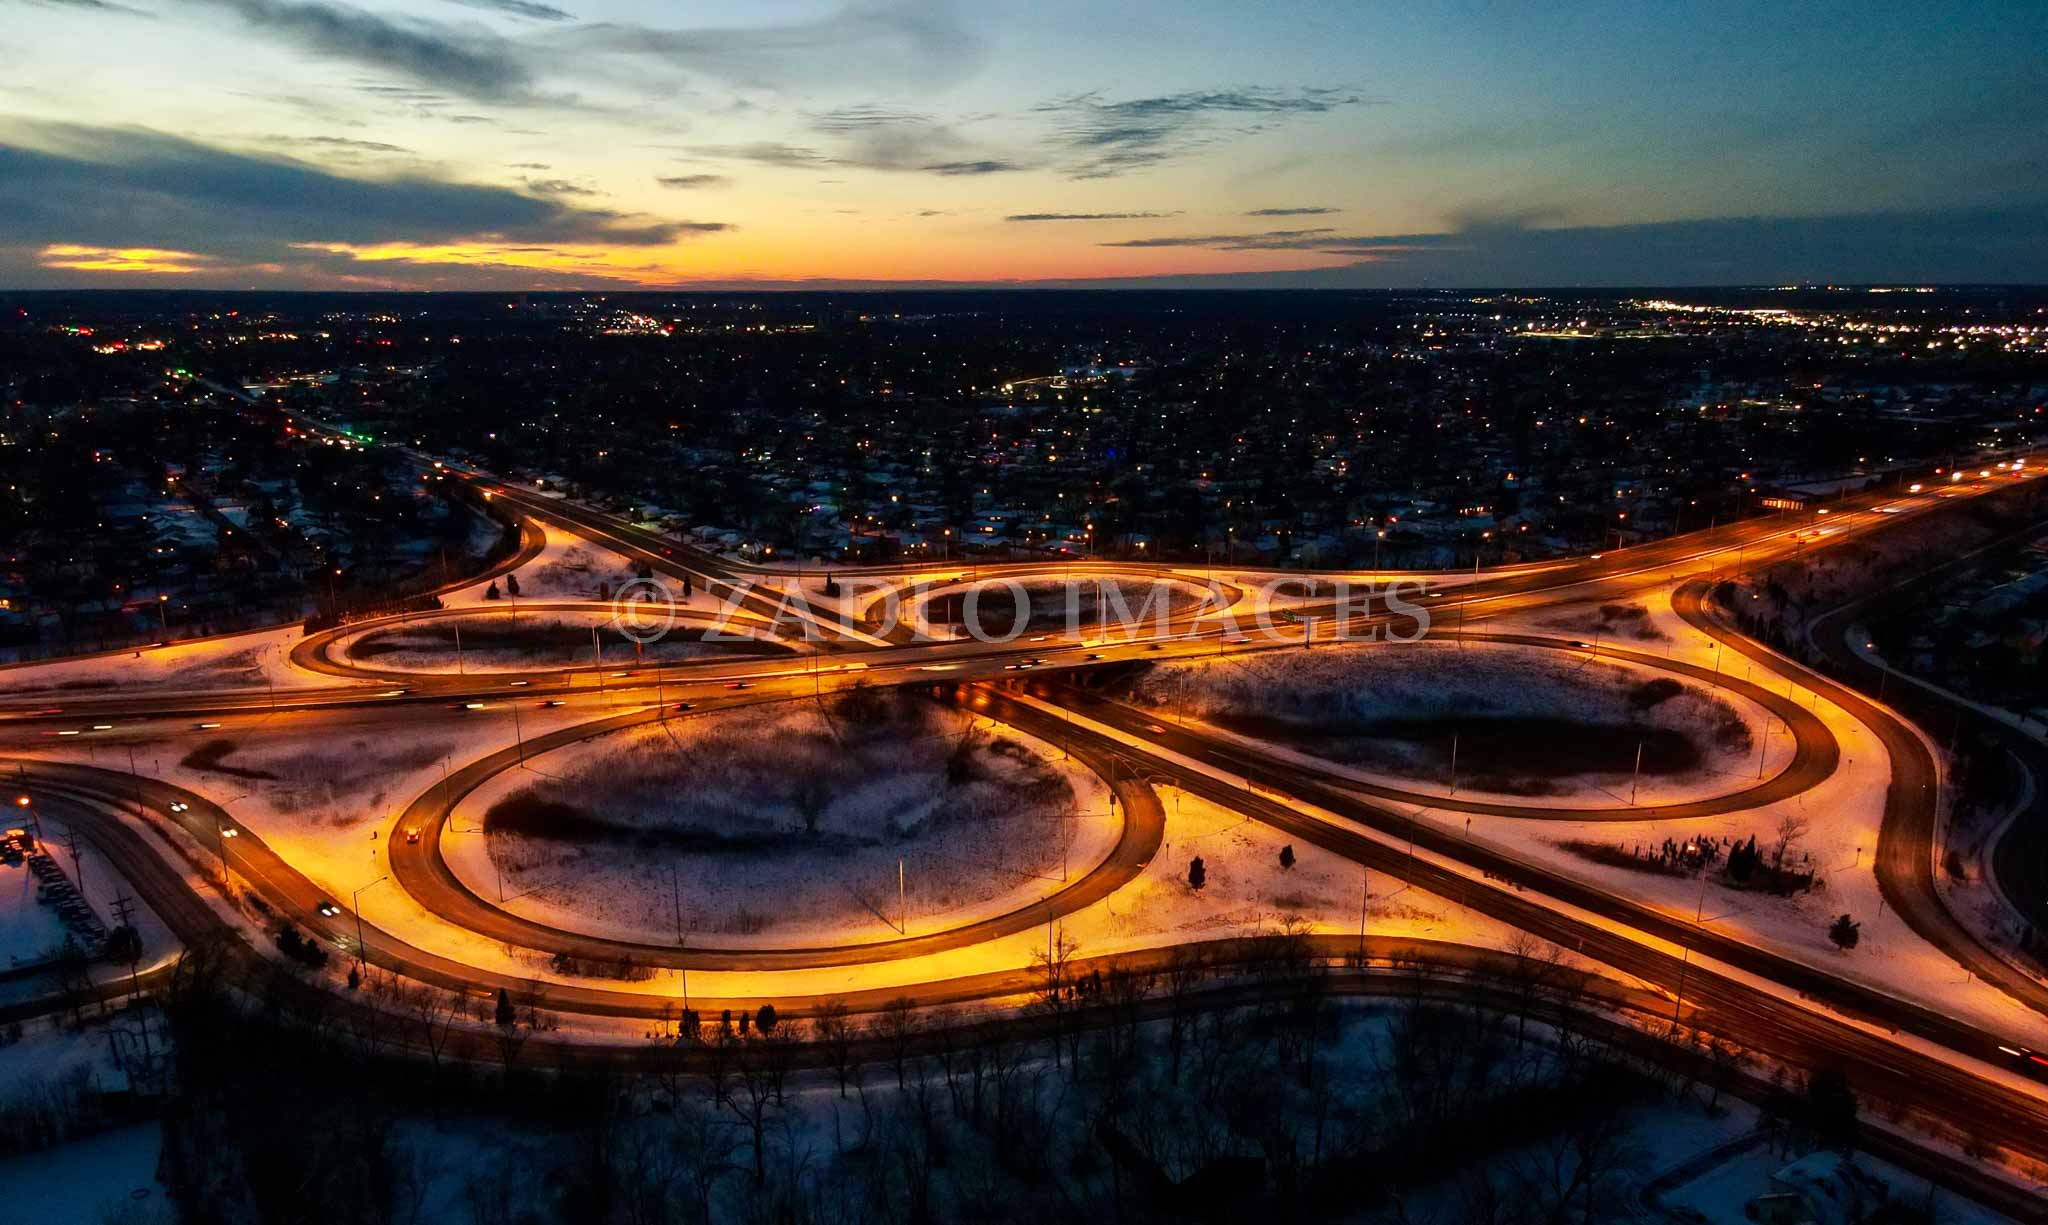 A long exposure photo of a highway with the sunset in the background.